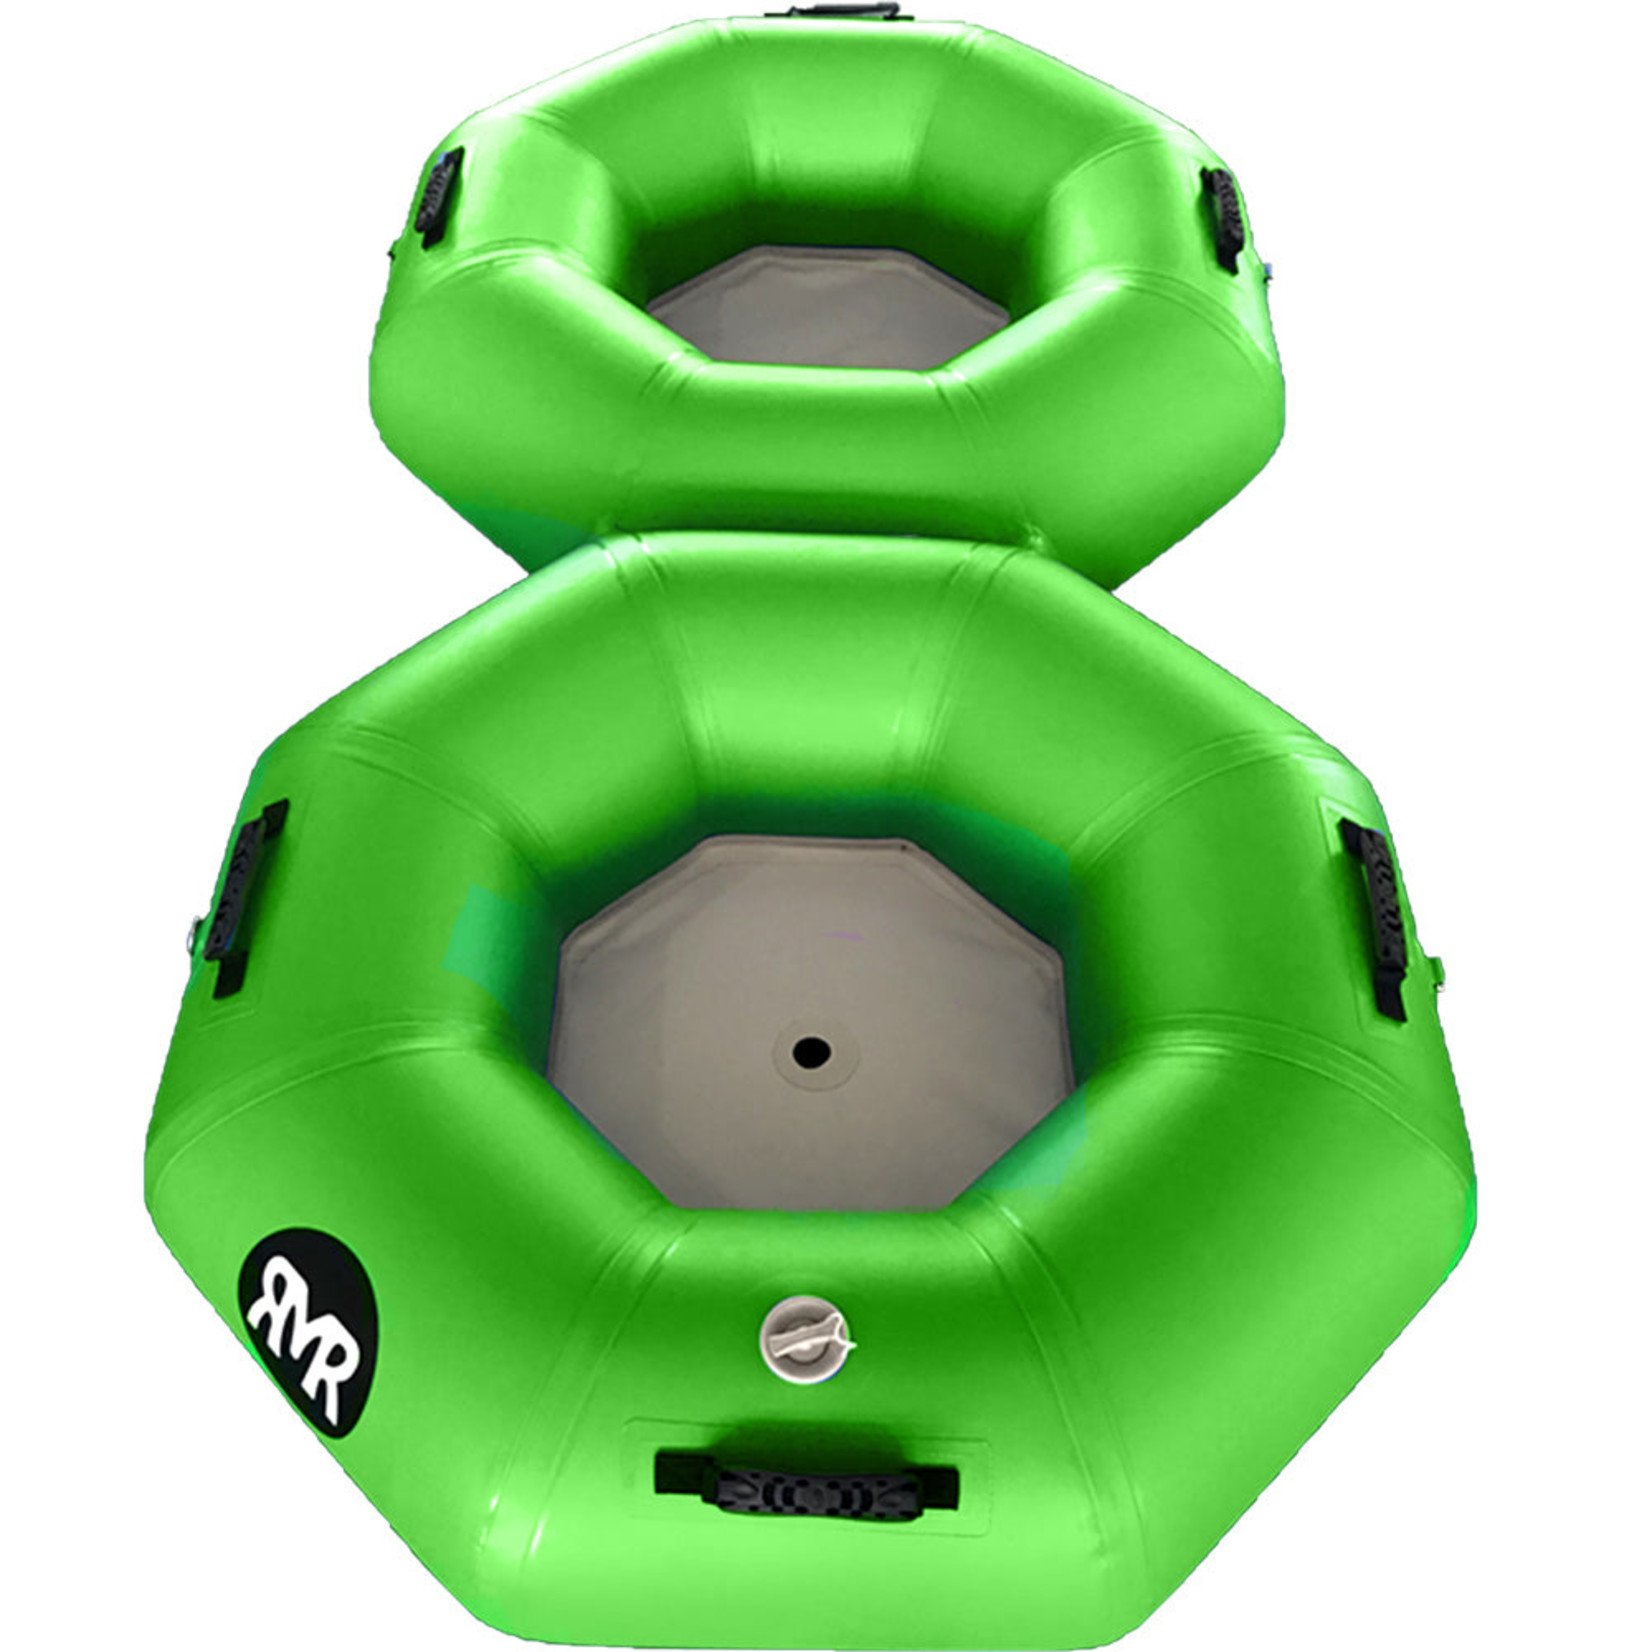 Rocky Mountain Rafts RMR Double River Tube